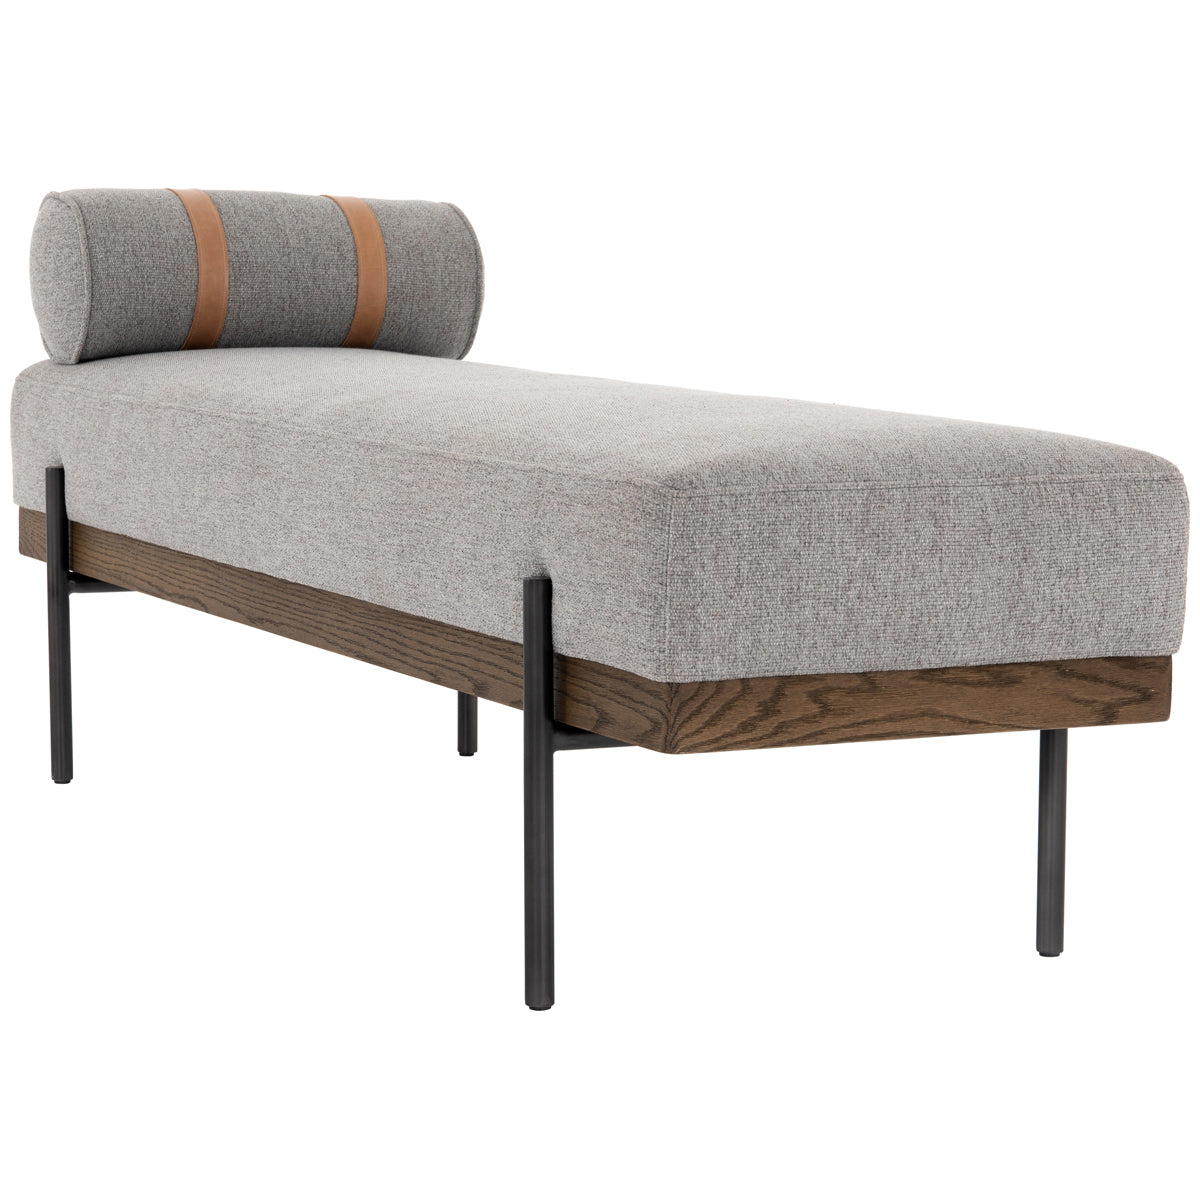 Four Hands Irondale Giorgio Accent Bench - Zion Ash